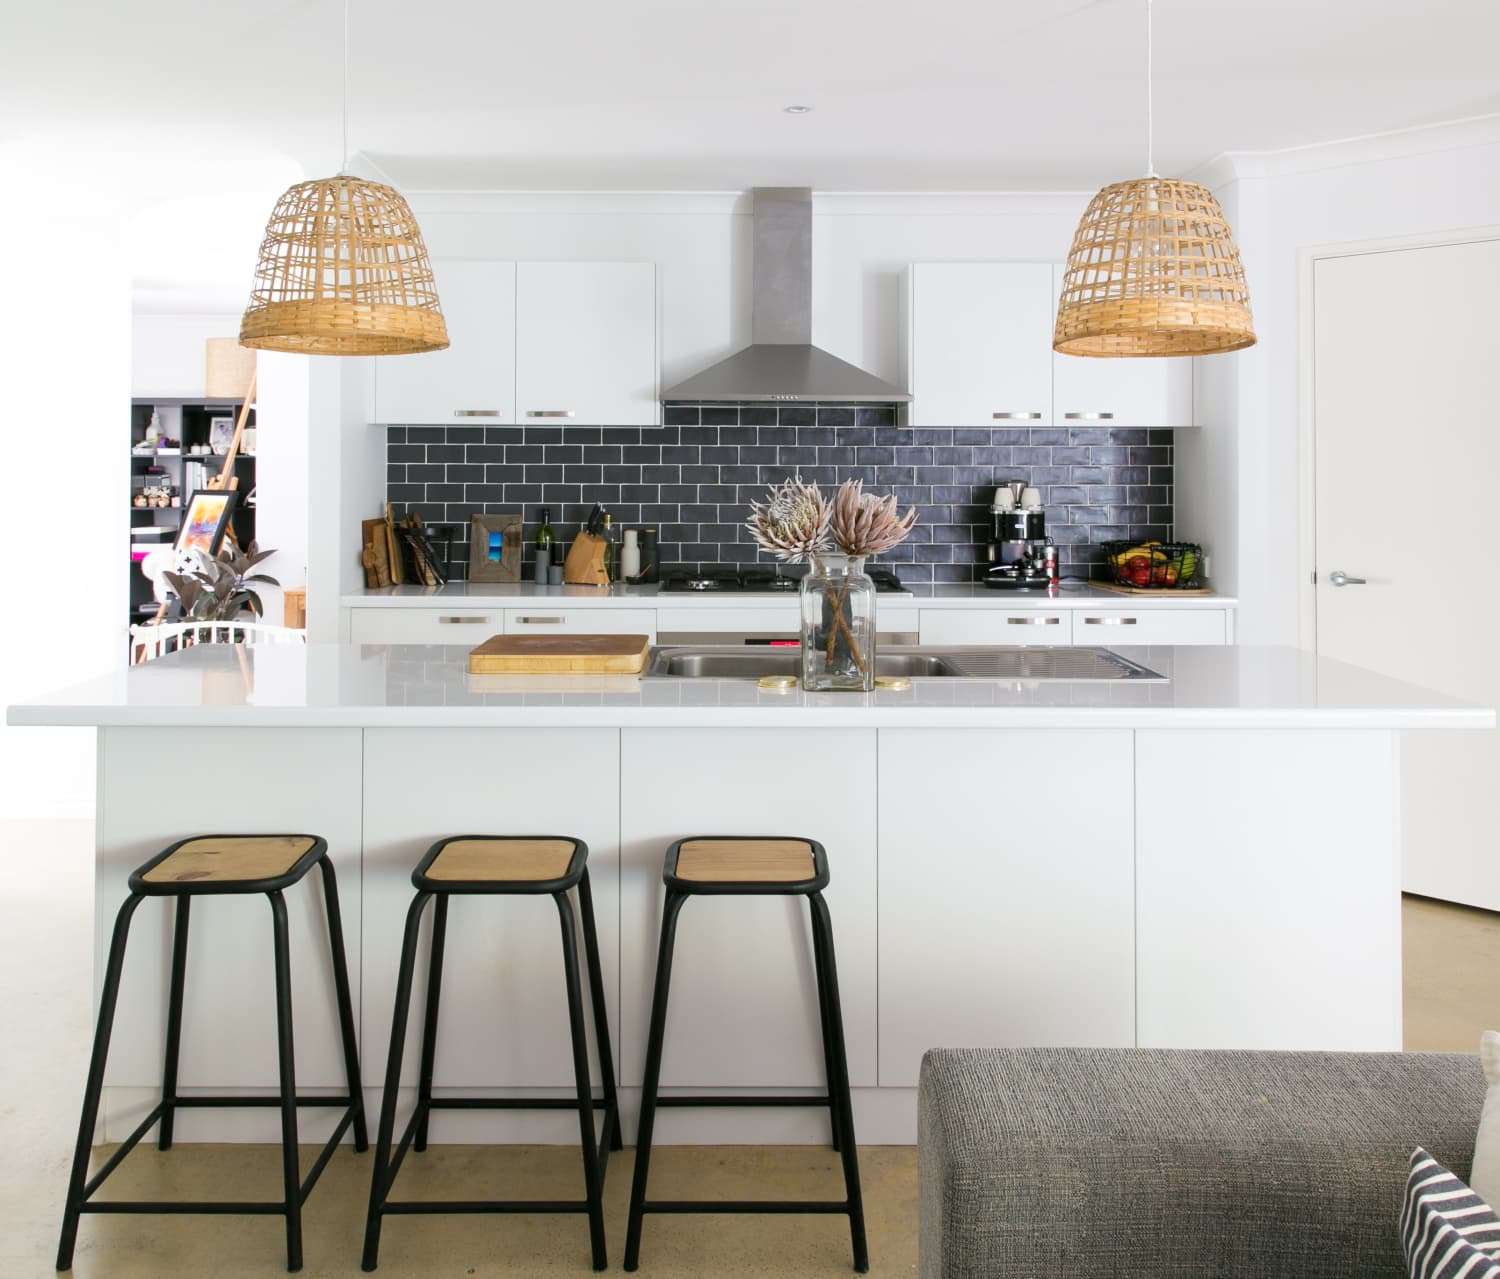 One HGTV Star Shows the Power of Having a Thoughtfully Designed Hood in the Kitchen